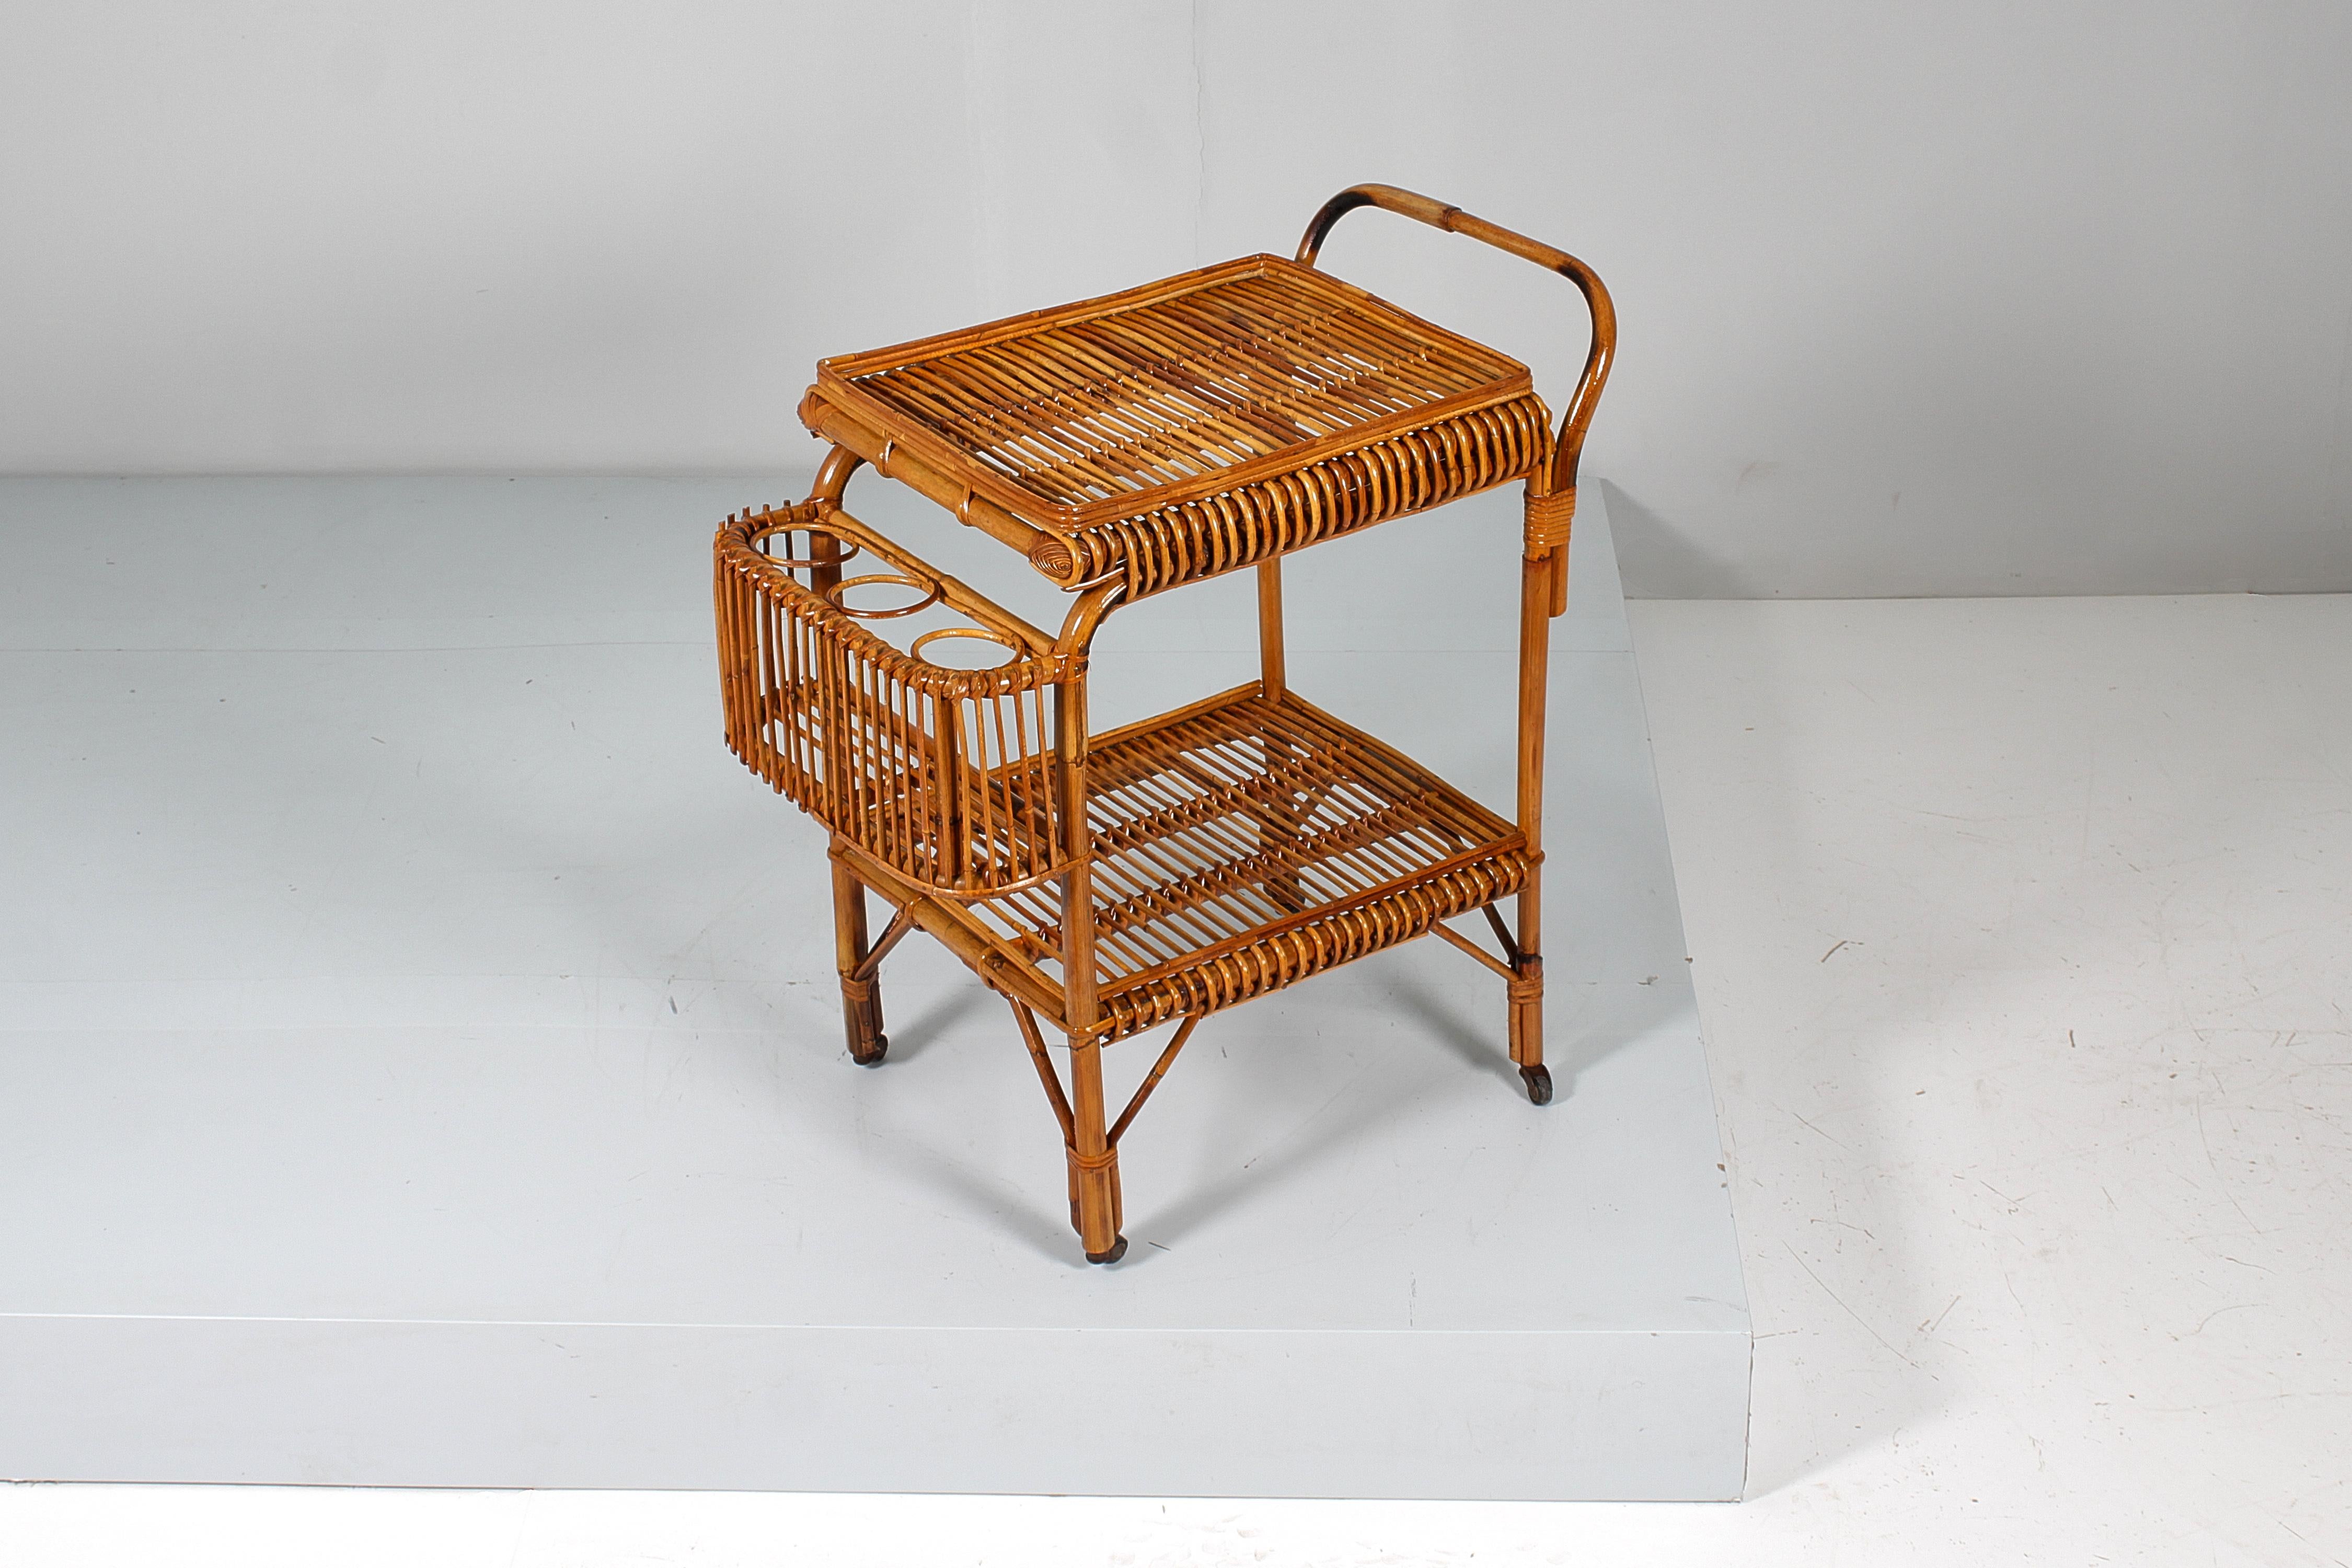 Elegant and rustic bar trolley in bamboo cane and rattan, with two large tops, handle, protruding bottle holder, resting on four wheels. Attributable to Bonacina, Italian manufacture from the 1950s
Wear consistent with age and use.